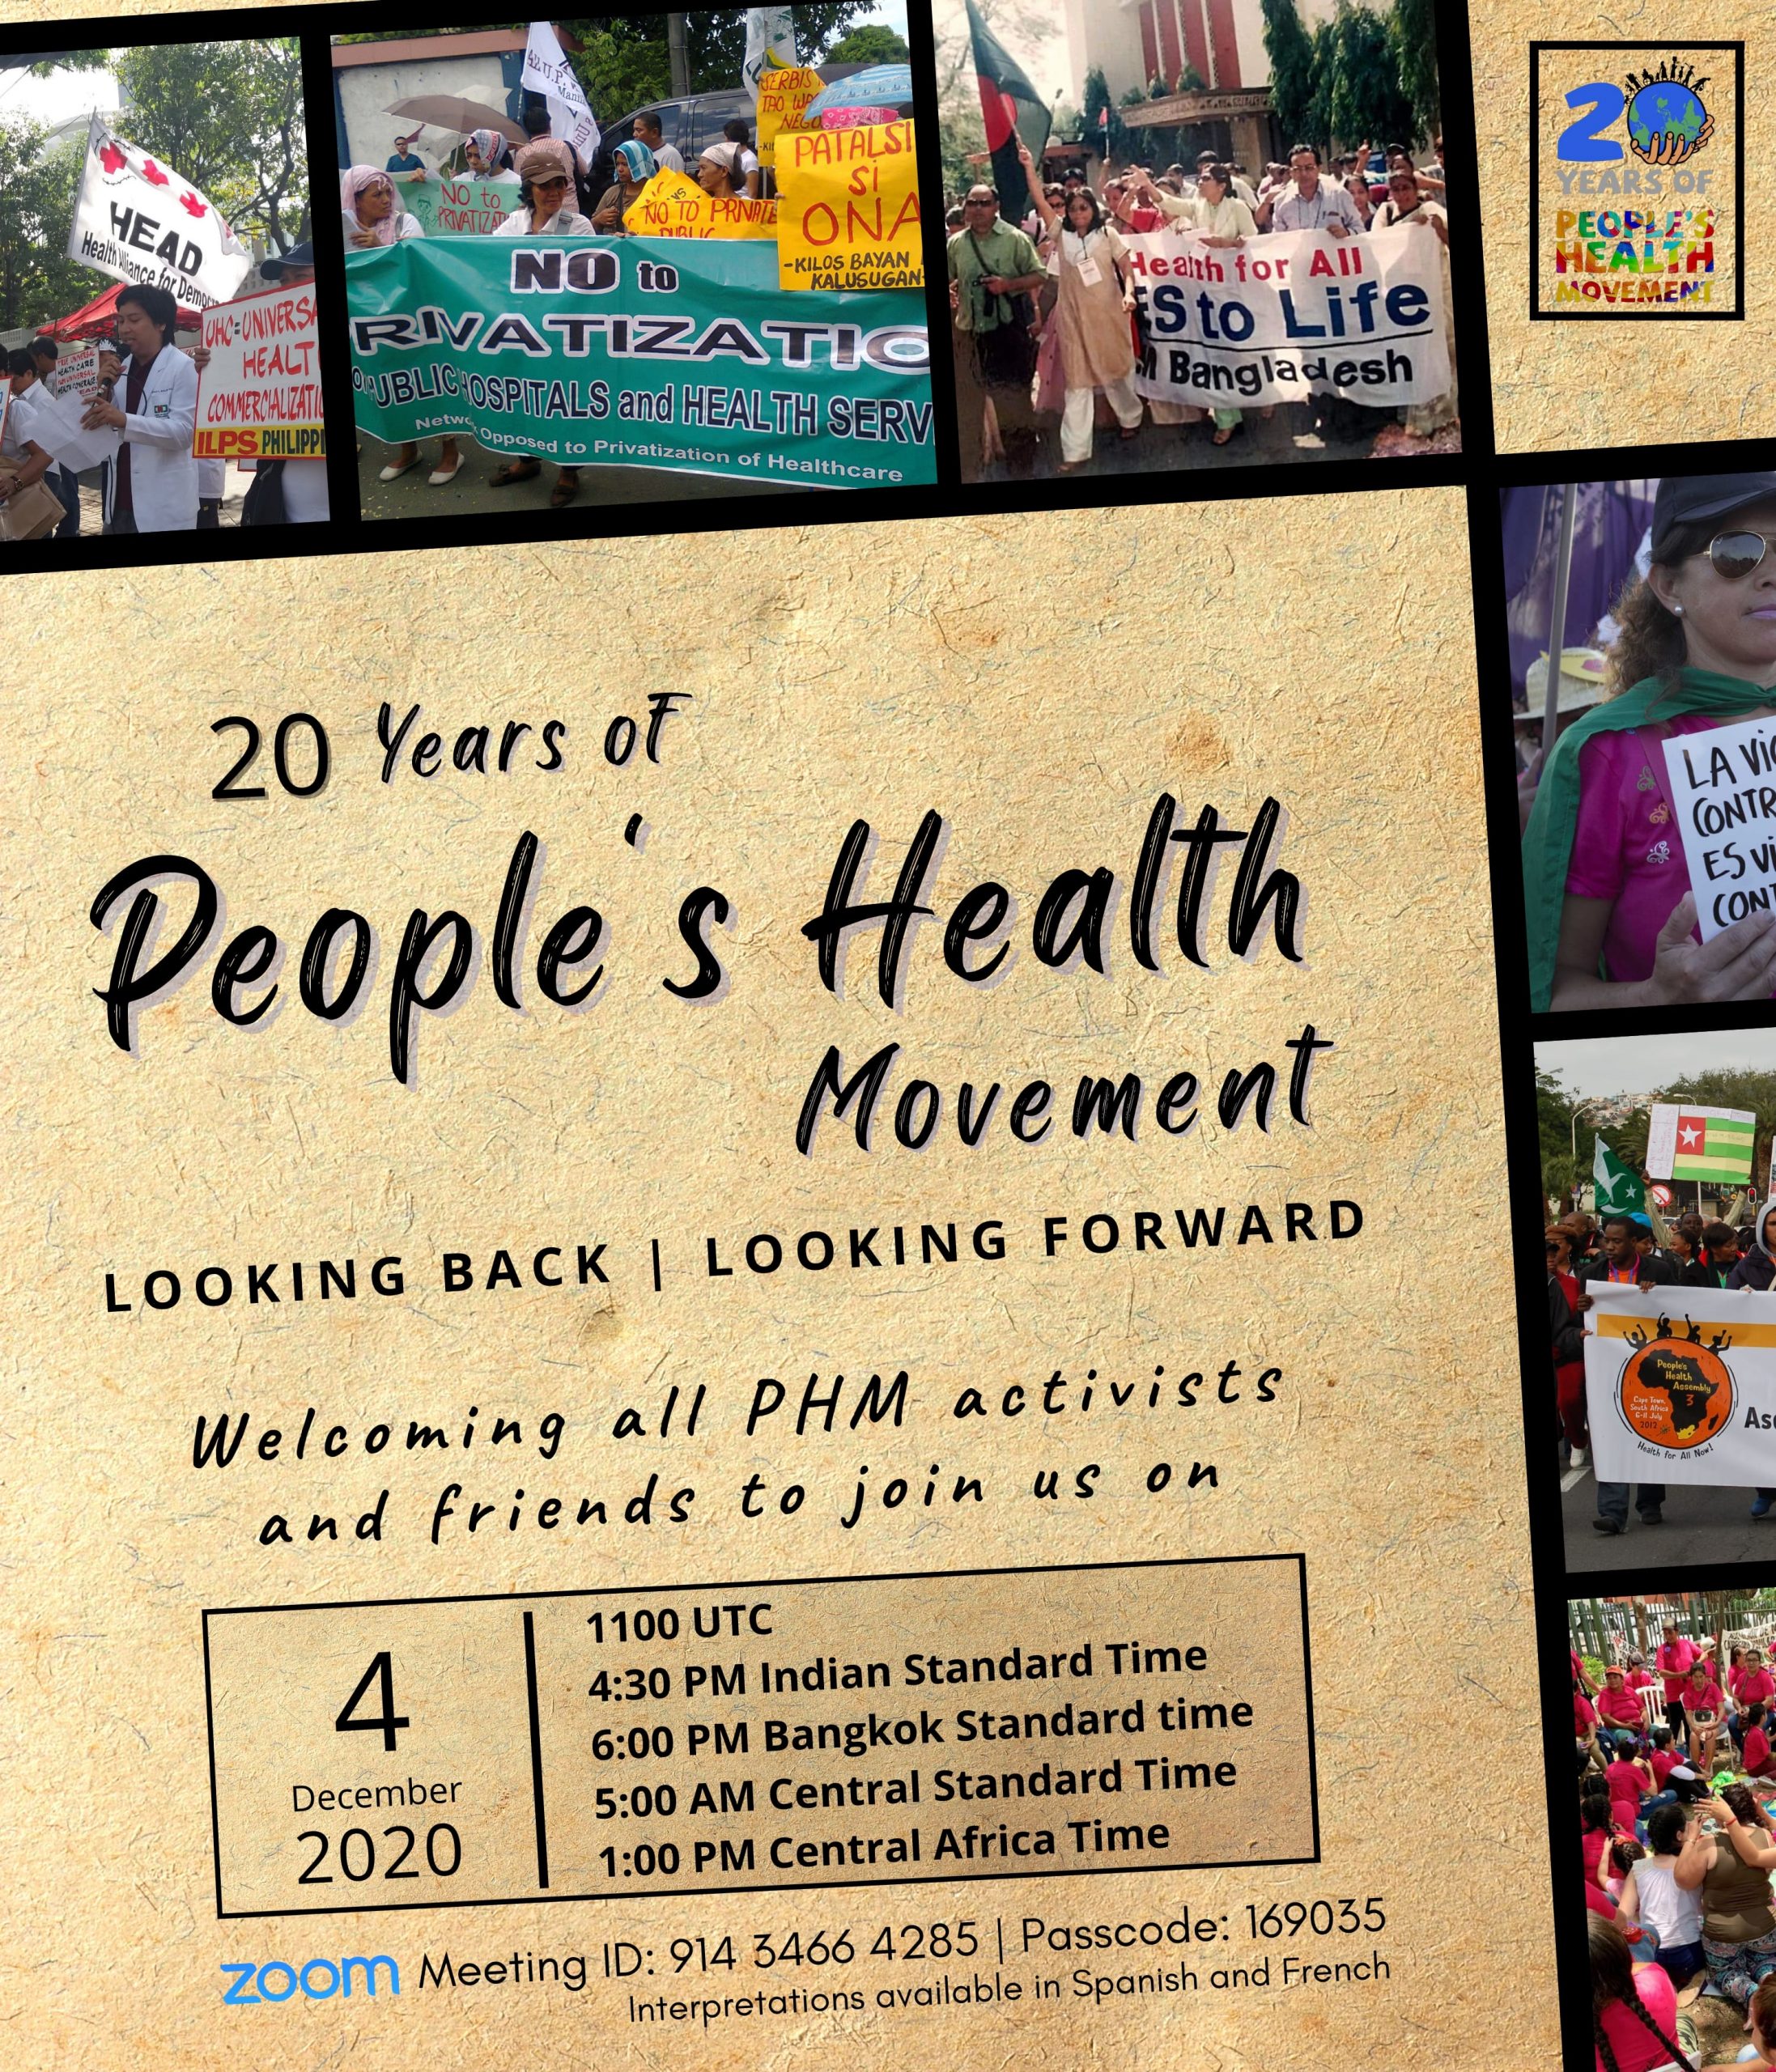 This year marks 20 years since activists and comrades across the world joined us in the first People’s Health Assembly in Bangladesh in 2000 and the PHM journey began.